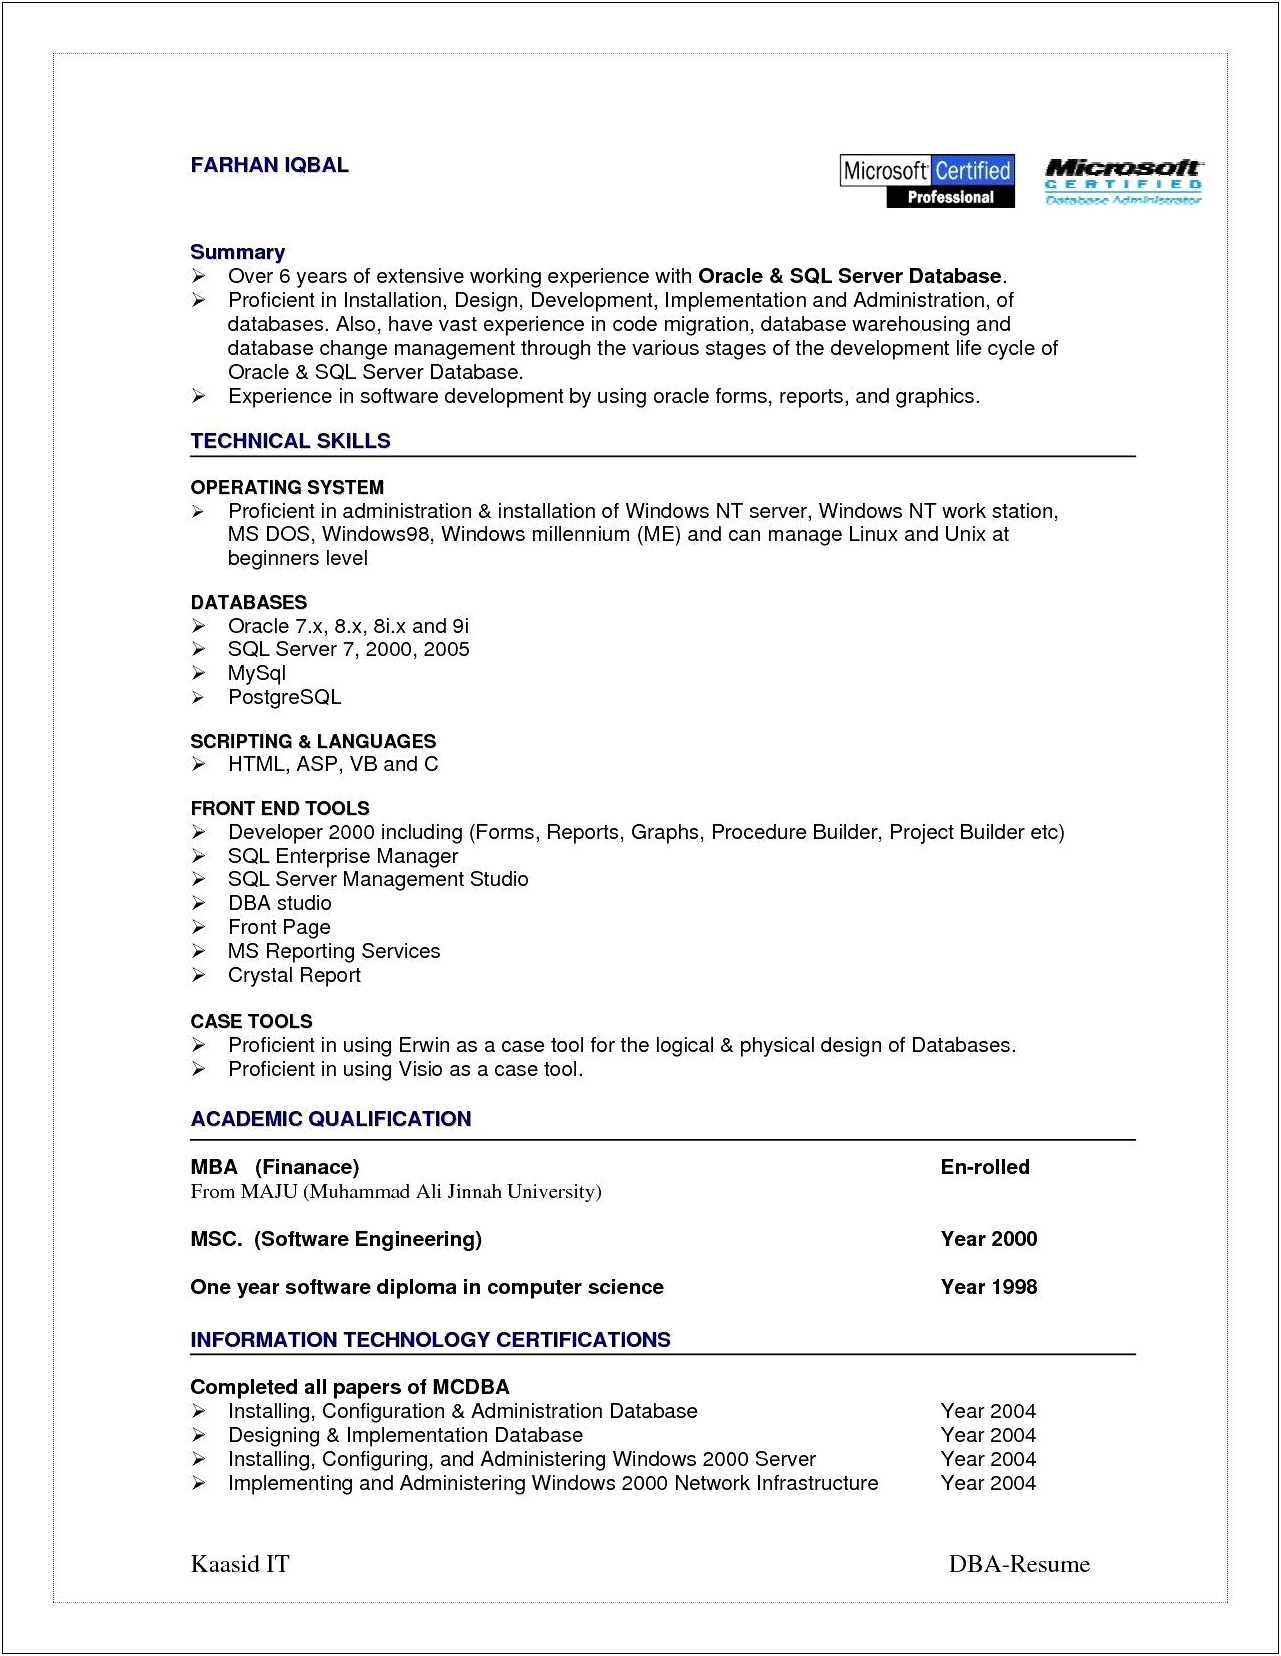 Oracle Dba Resume For 6 Years Experience